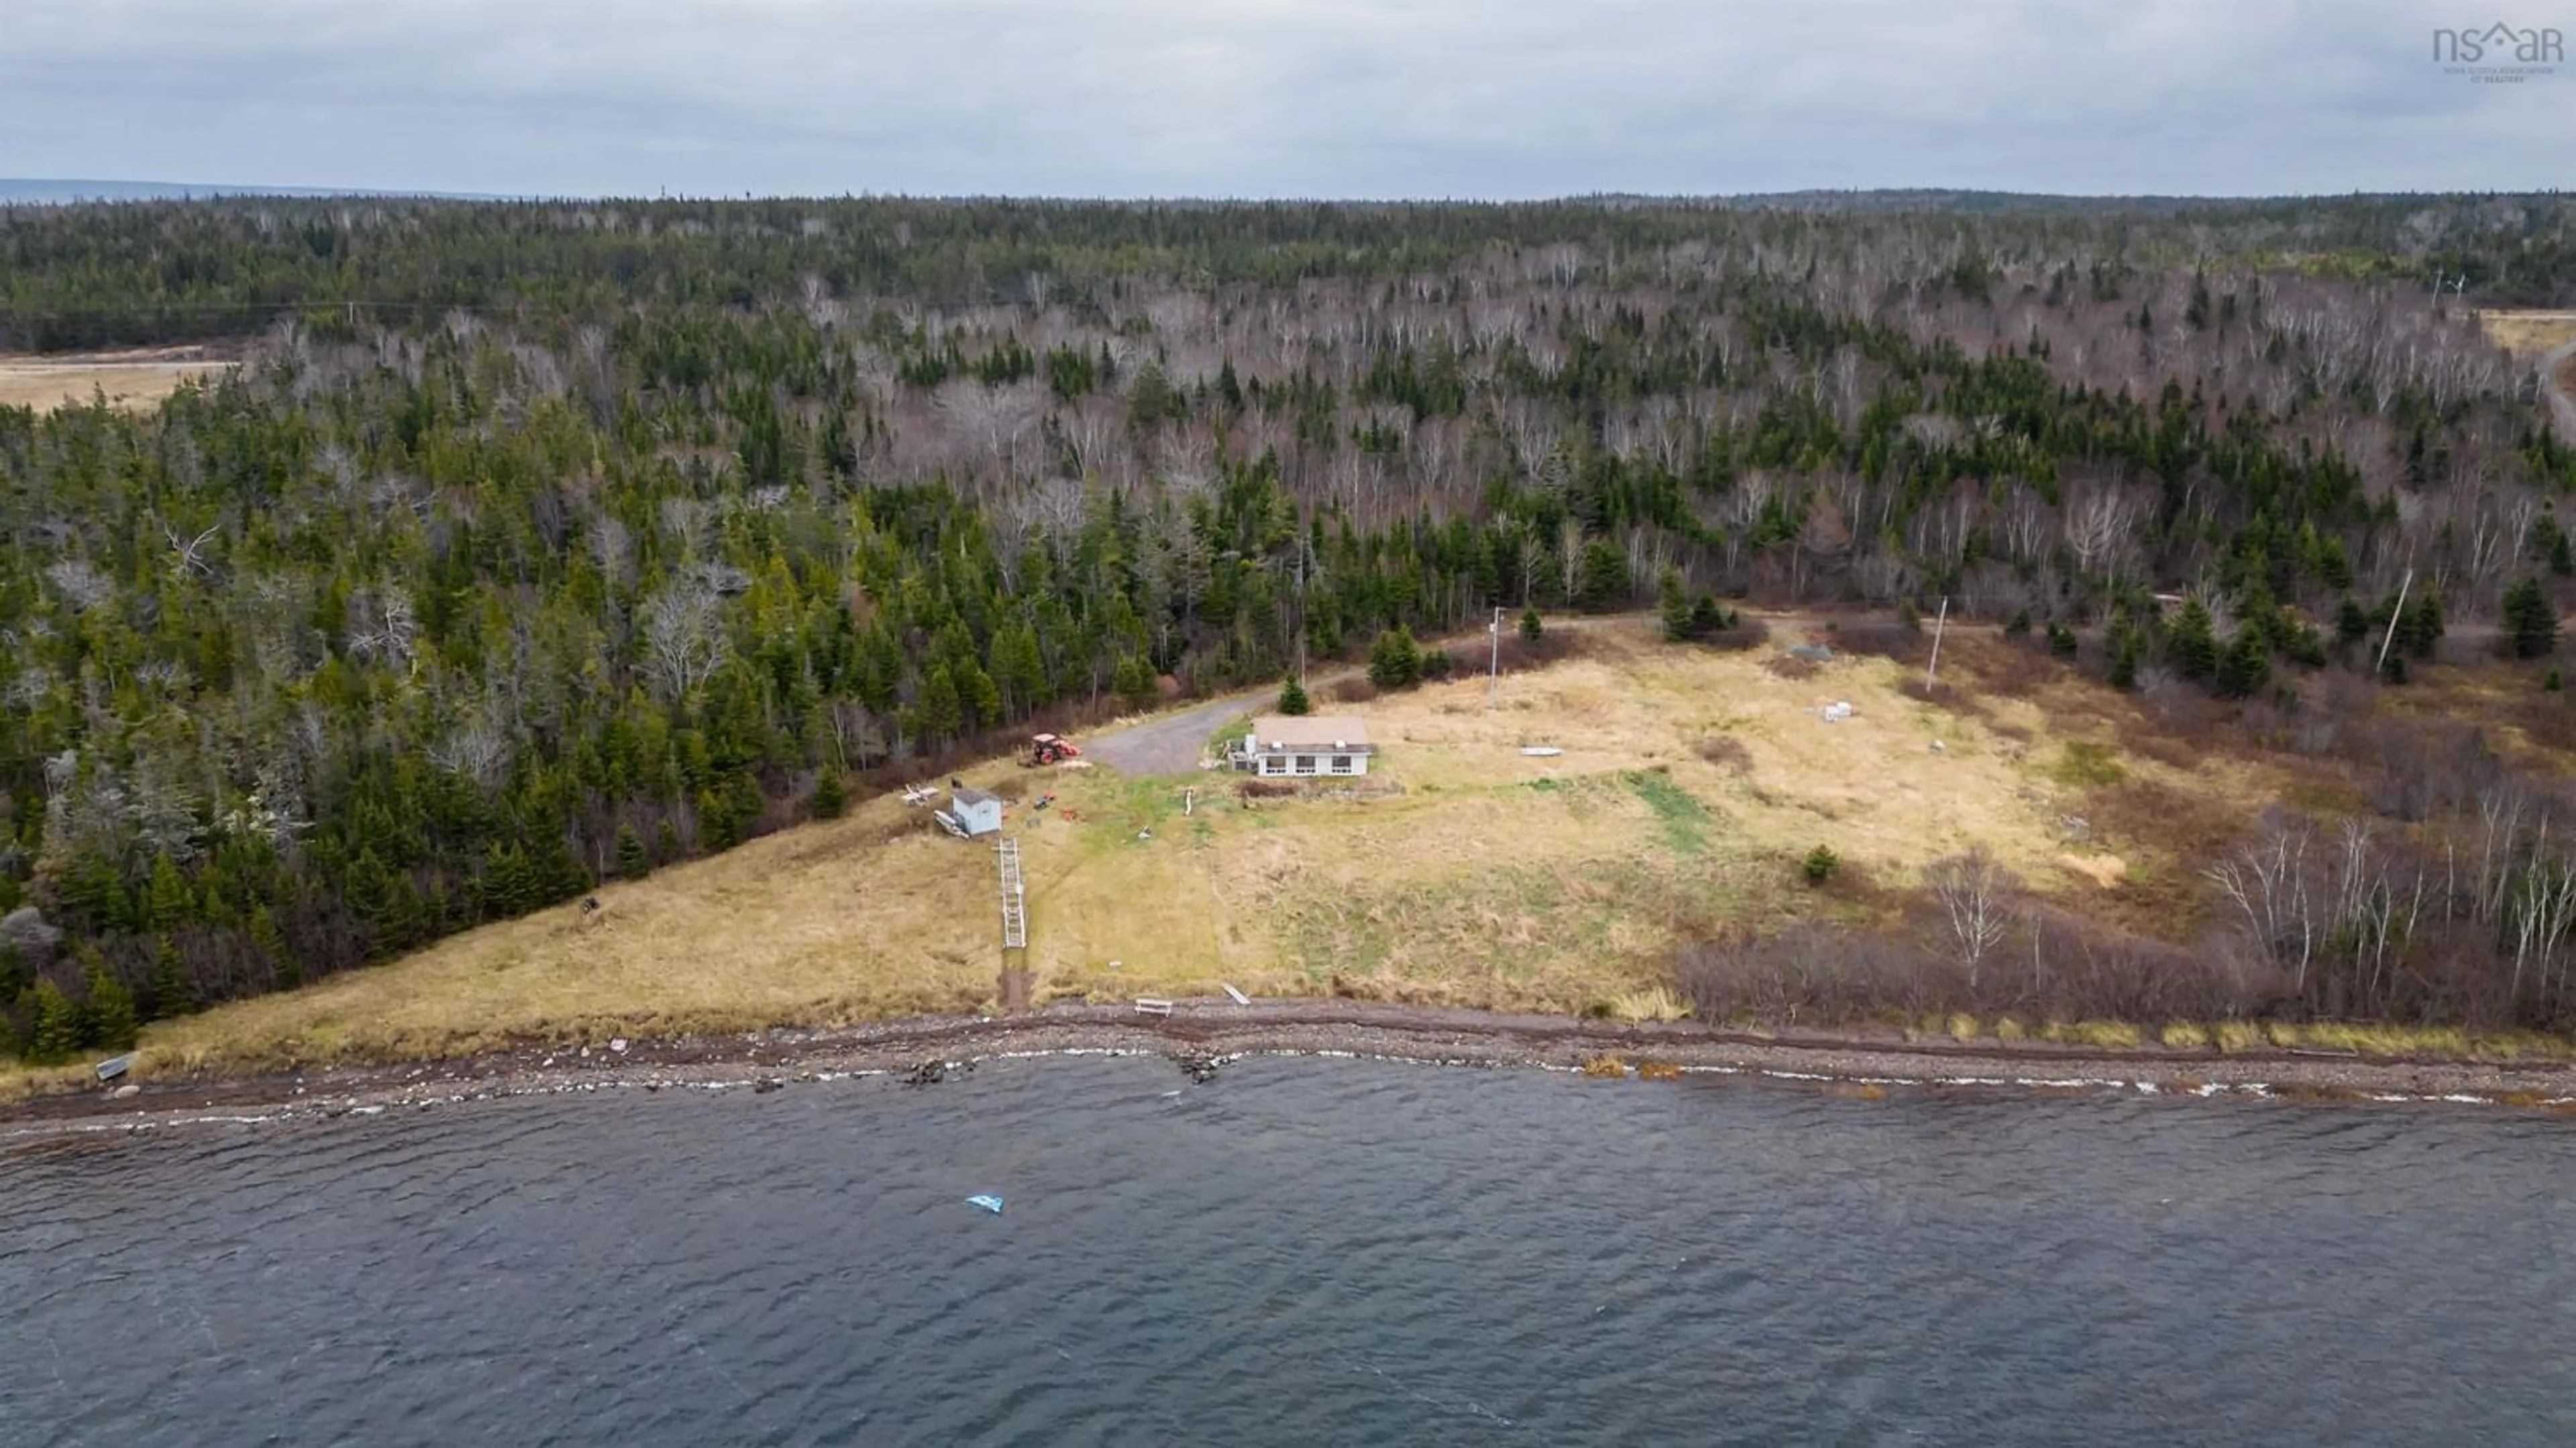 Cottage for 12795 Highway 4 Hwy, Soldiers Cove Nova Scotia B1J 1Z5